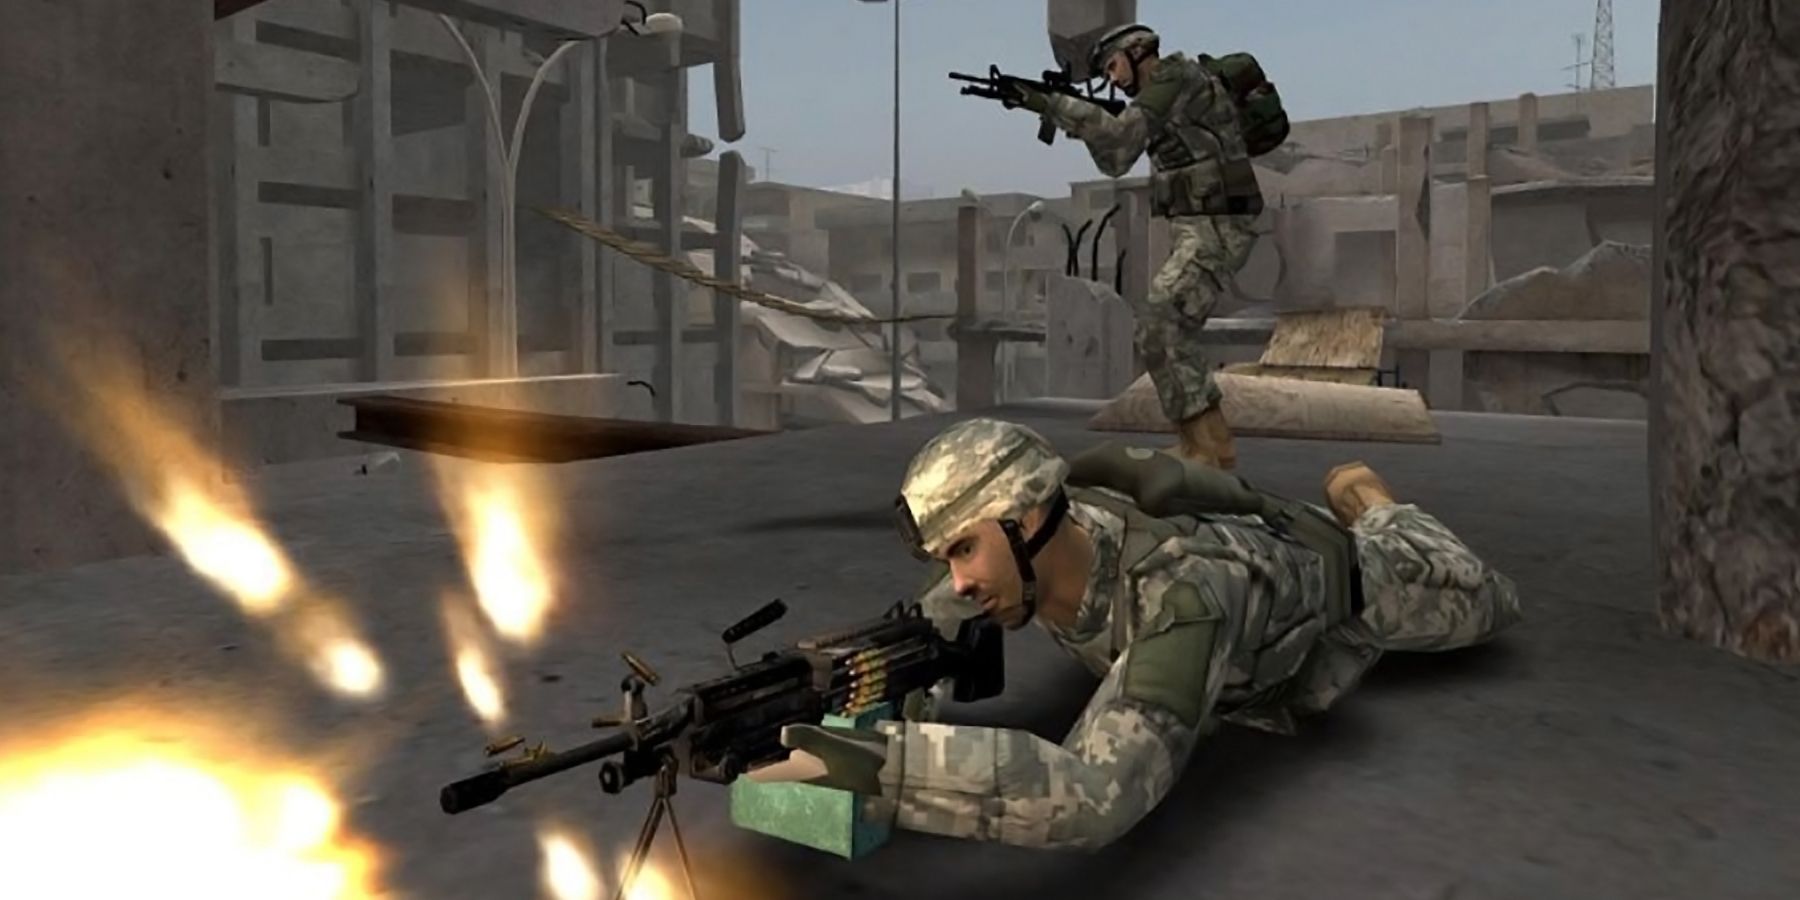 America's Army - Soldier shooting in prone